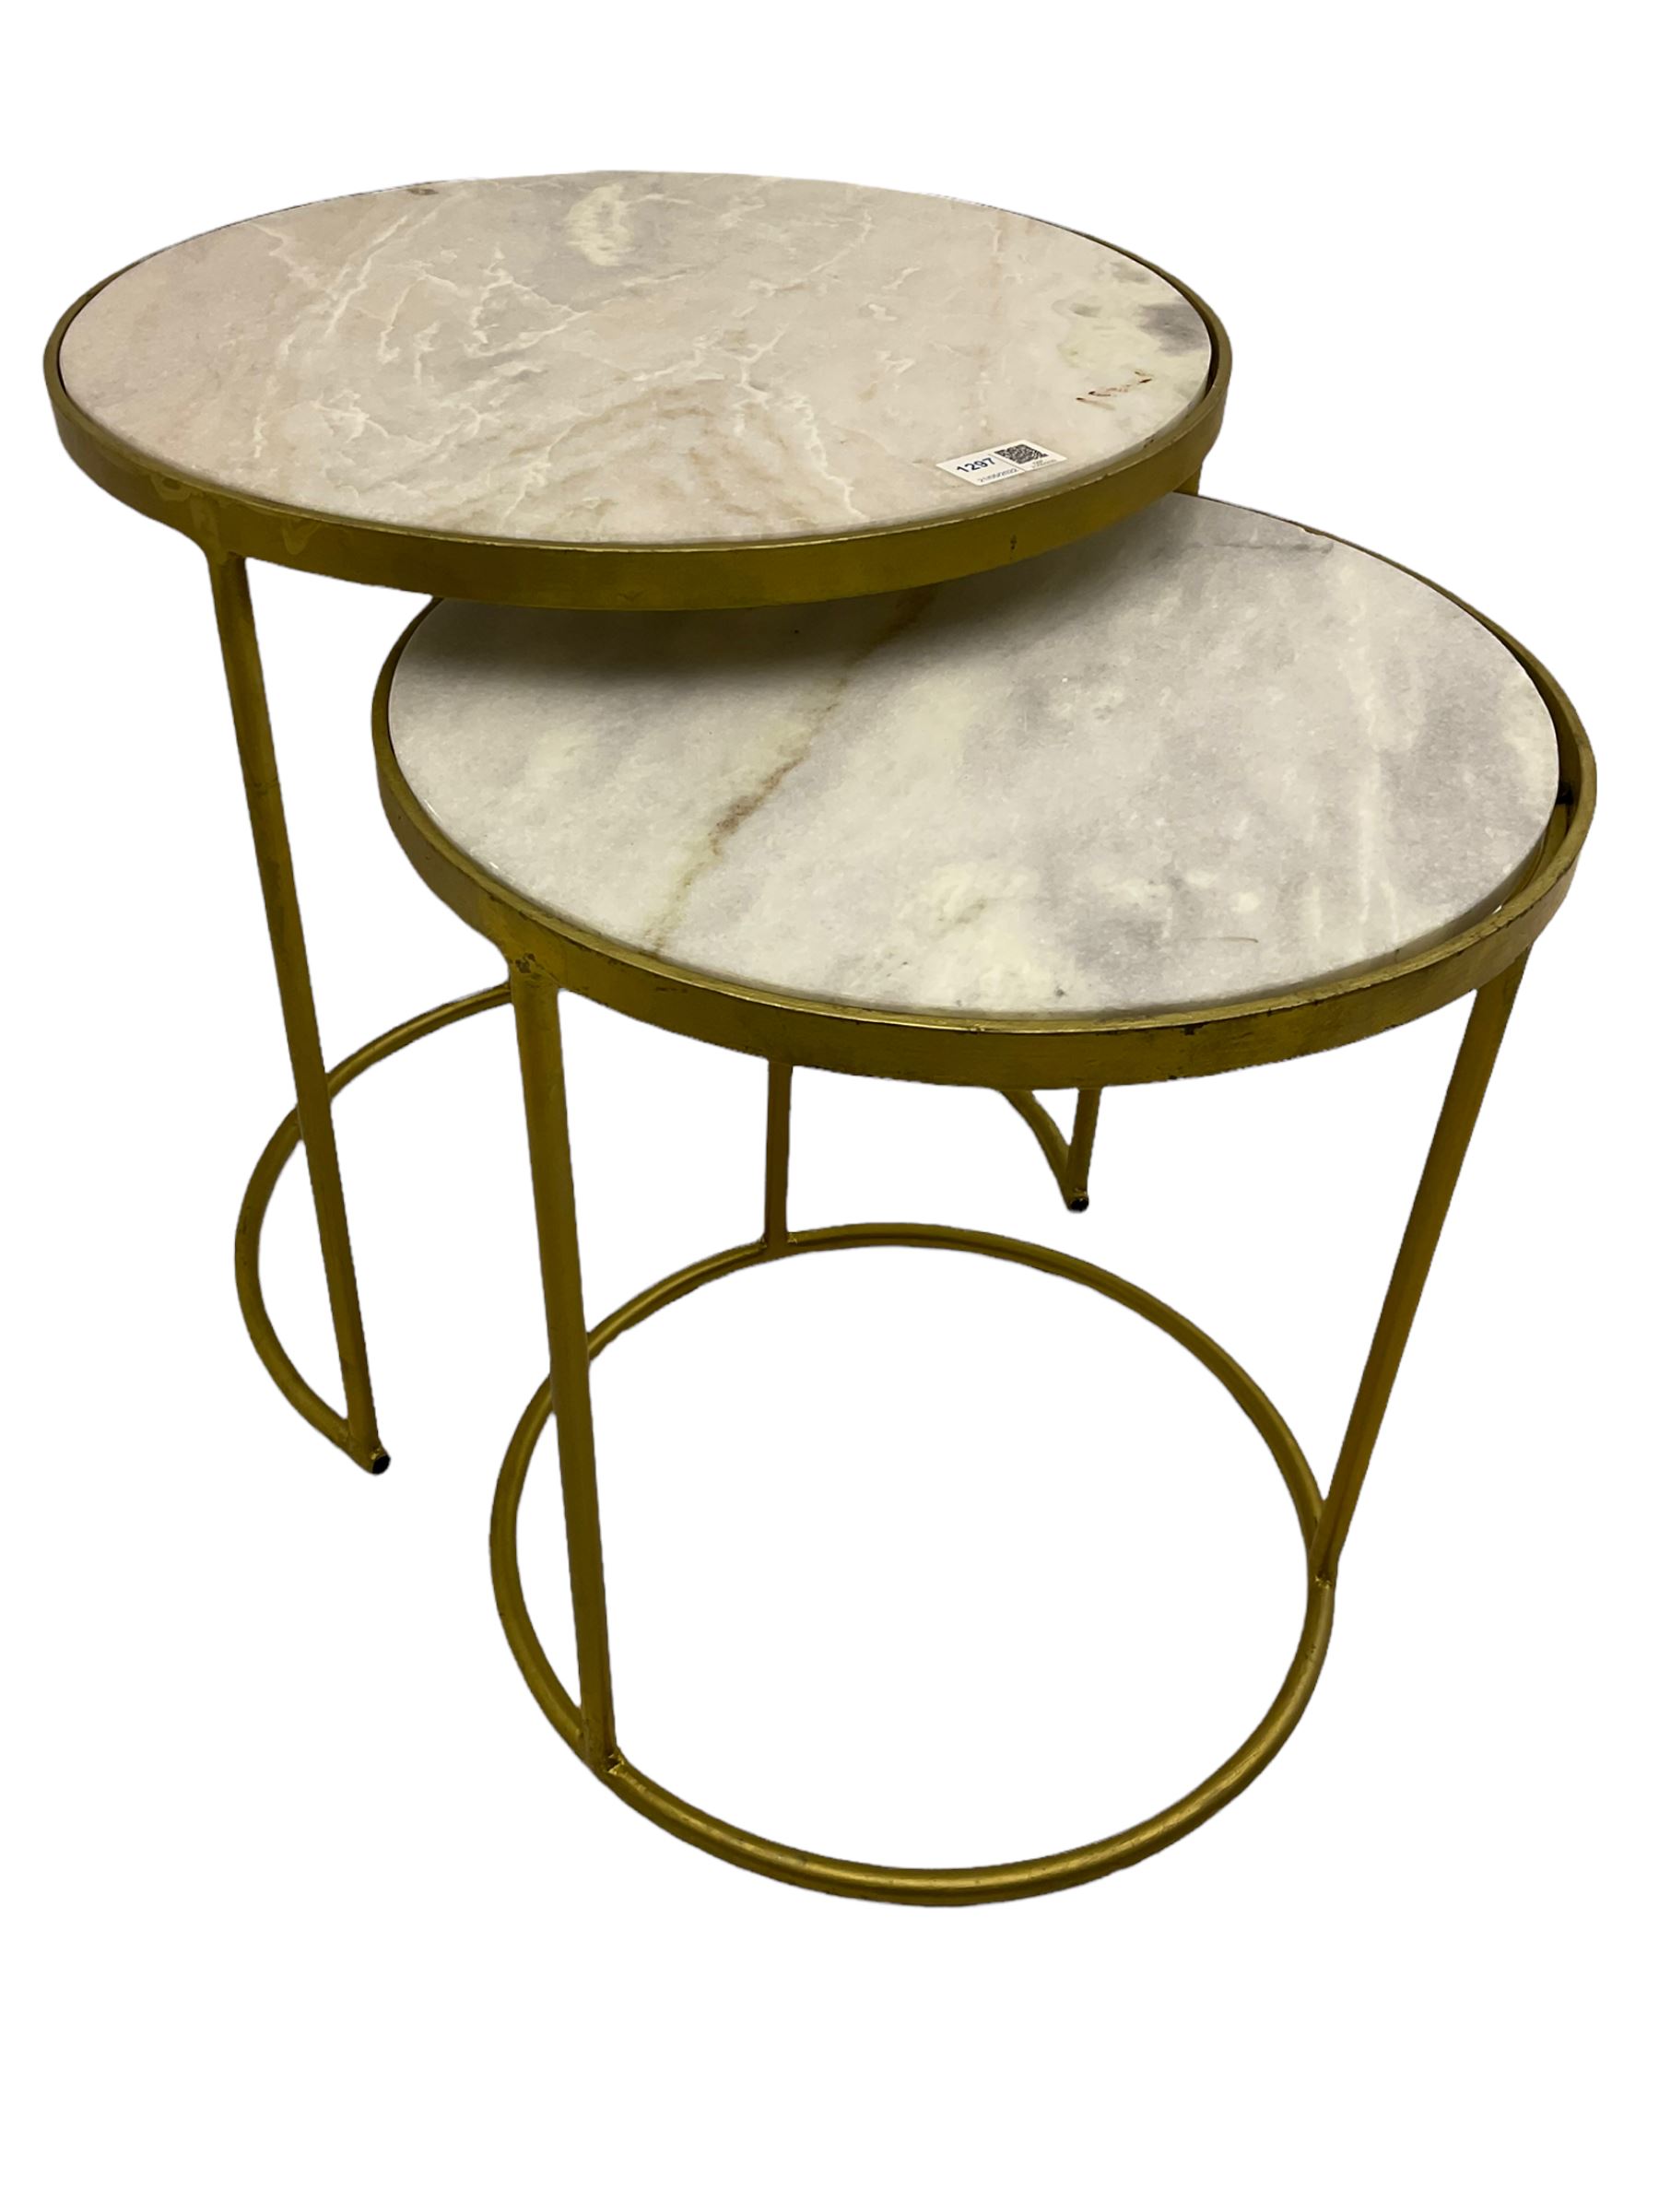 Two contemporary nesting side tables - Image 3 of 4